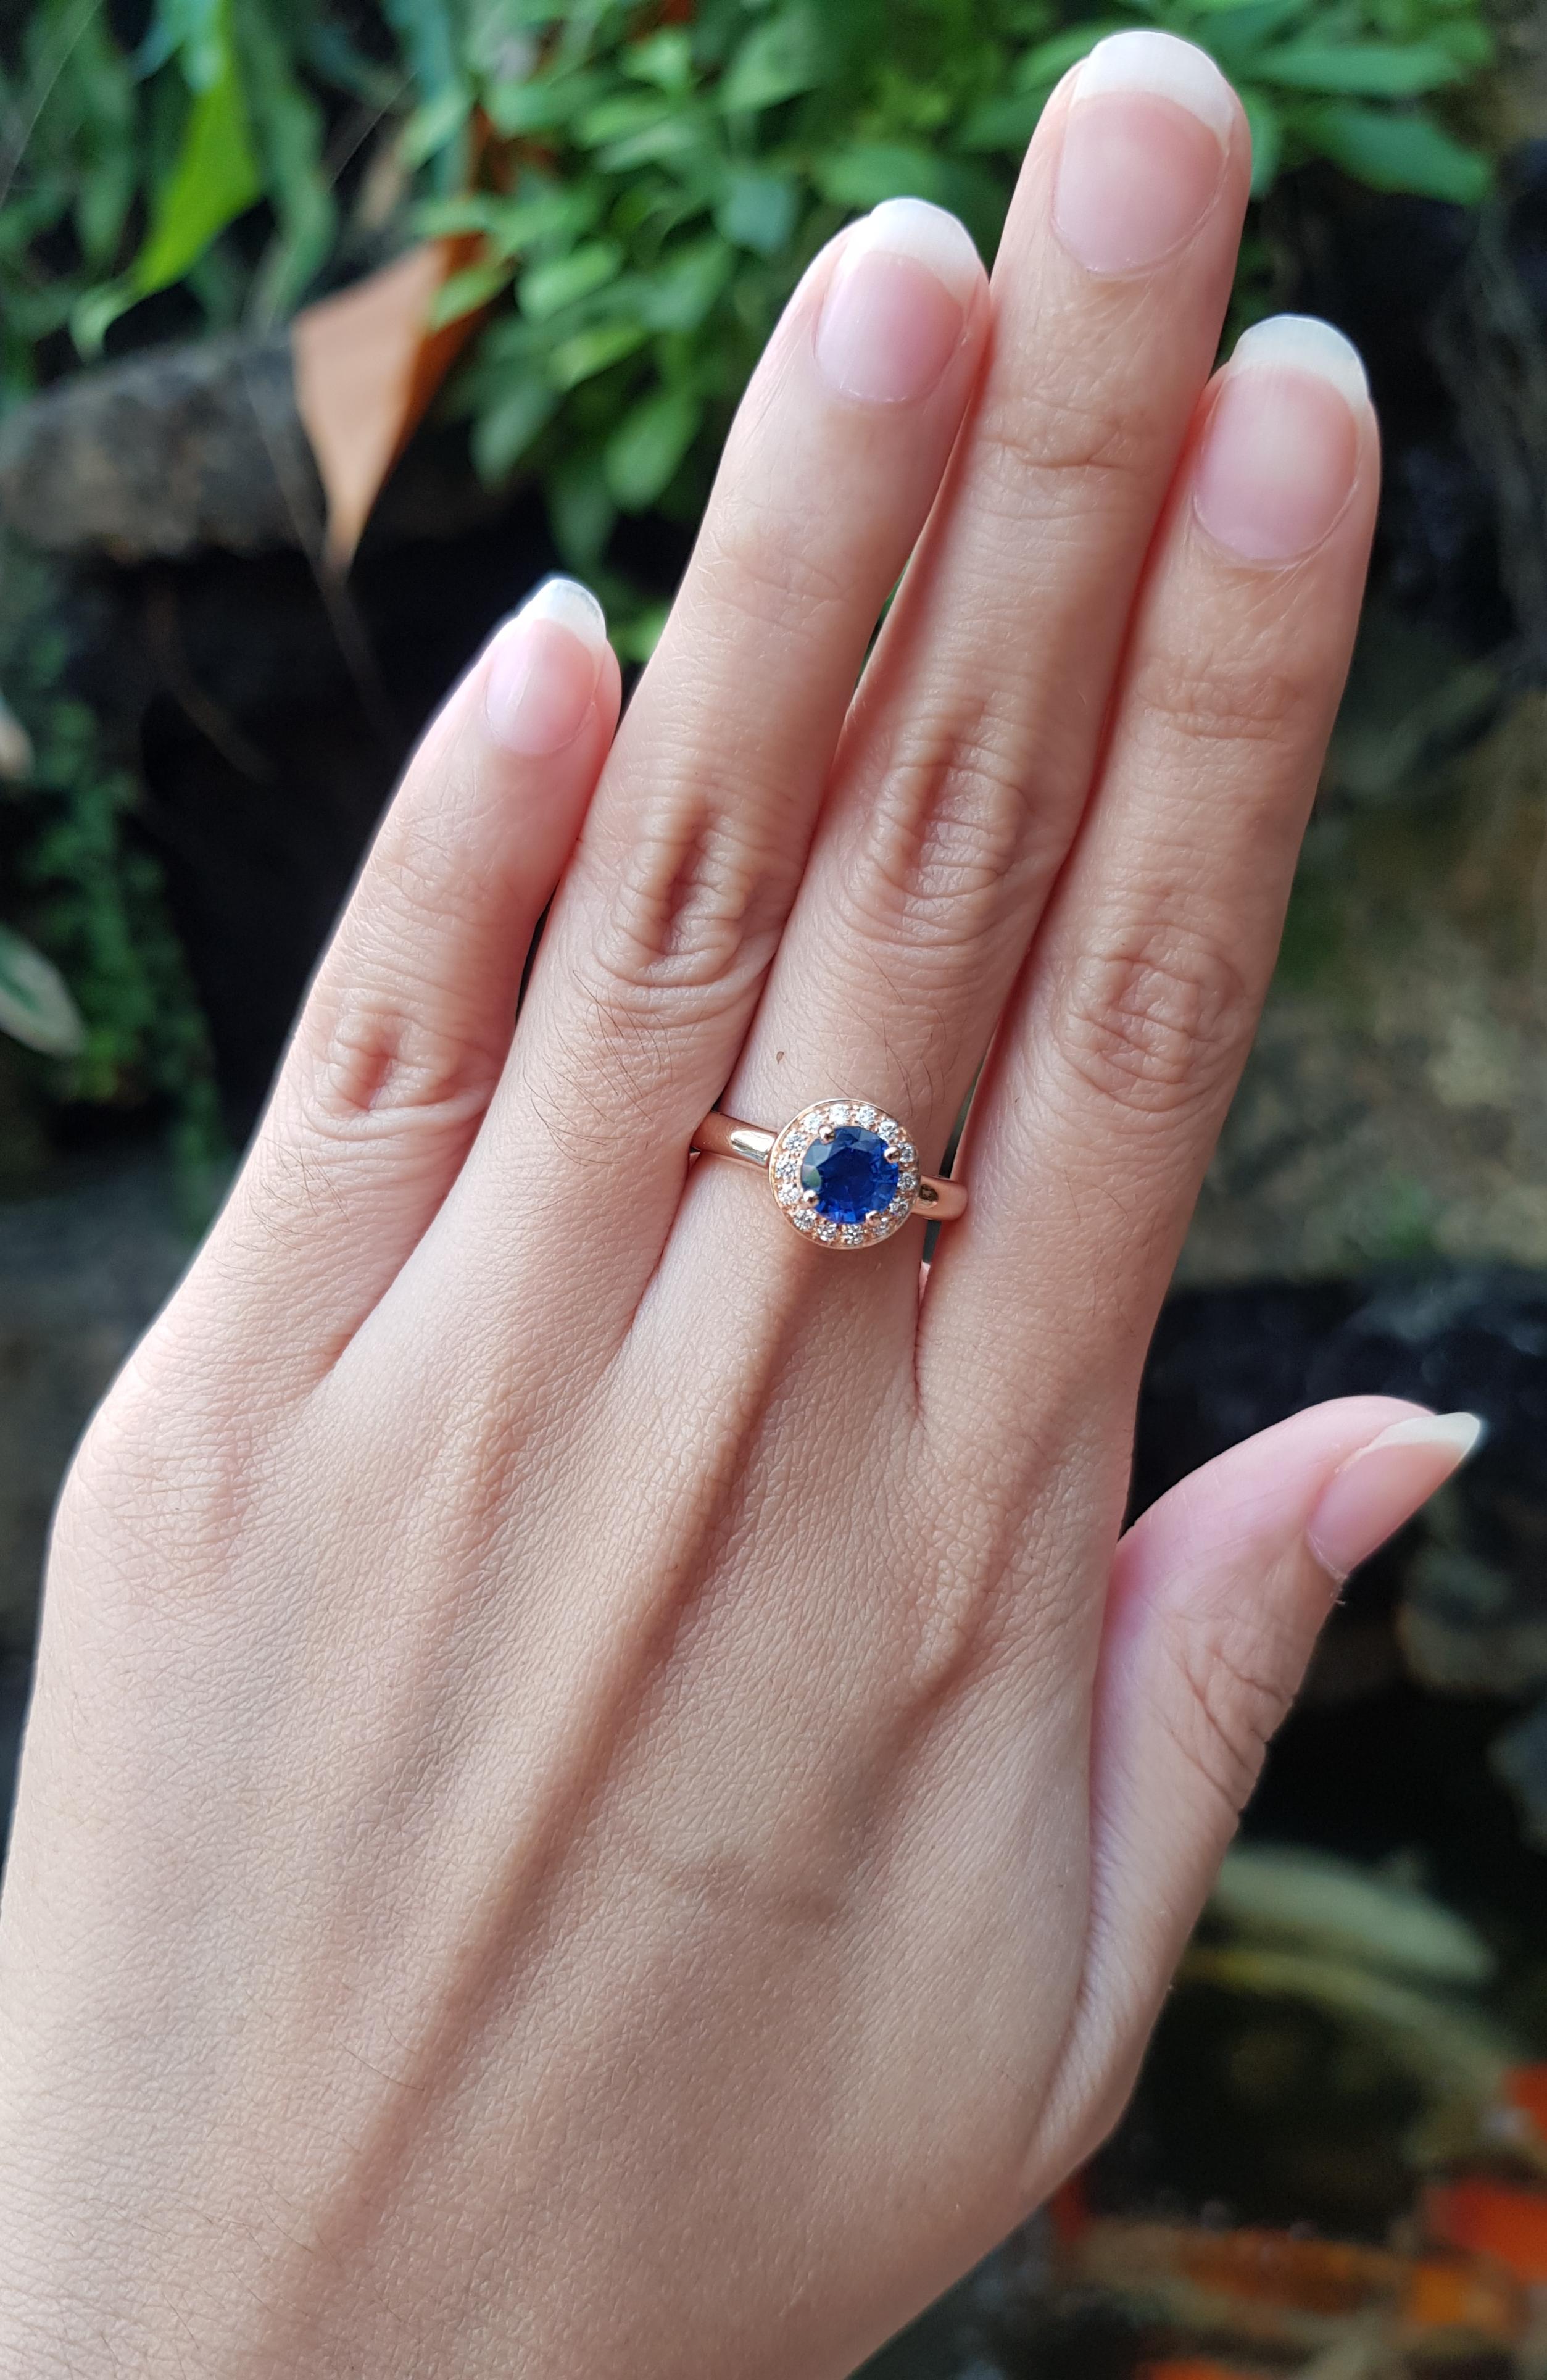 Blue Sapphire 1.31 carats with Diamond 0.14 carat Ring set in 18 Karat Rose Gold Settings

Width:  0.9 cm 
Length: 0.9 cm
Ring Size: 53
Total Weight: 4.43 grams

